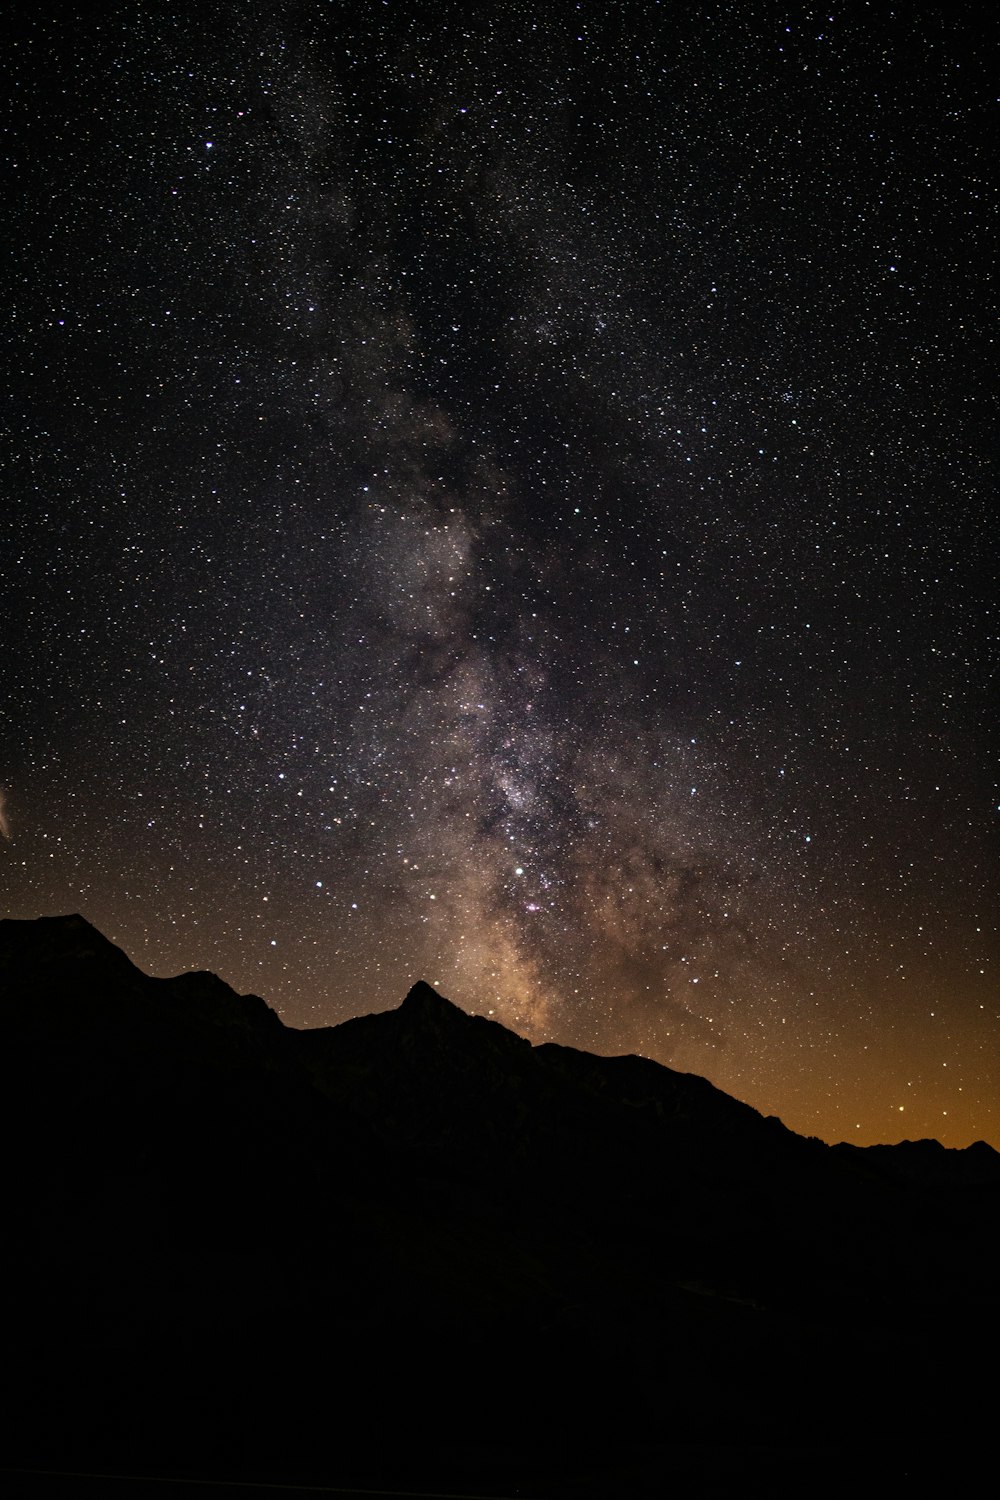 silhouette of mountain under starry sky